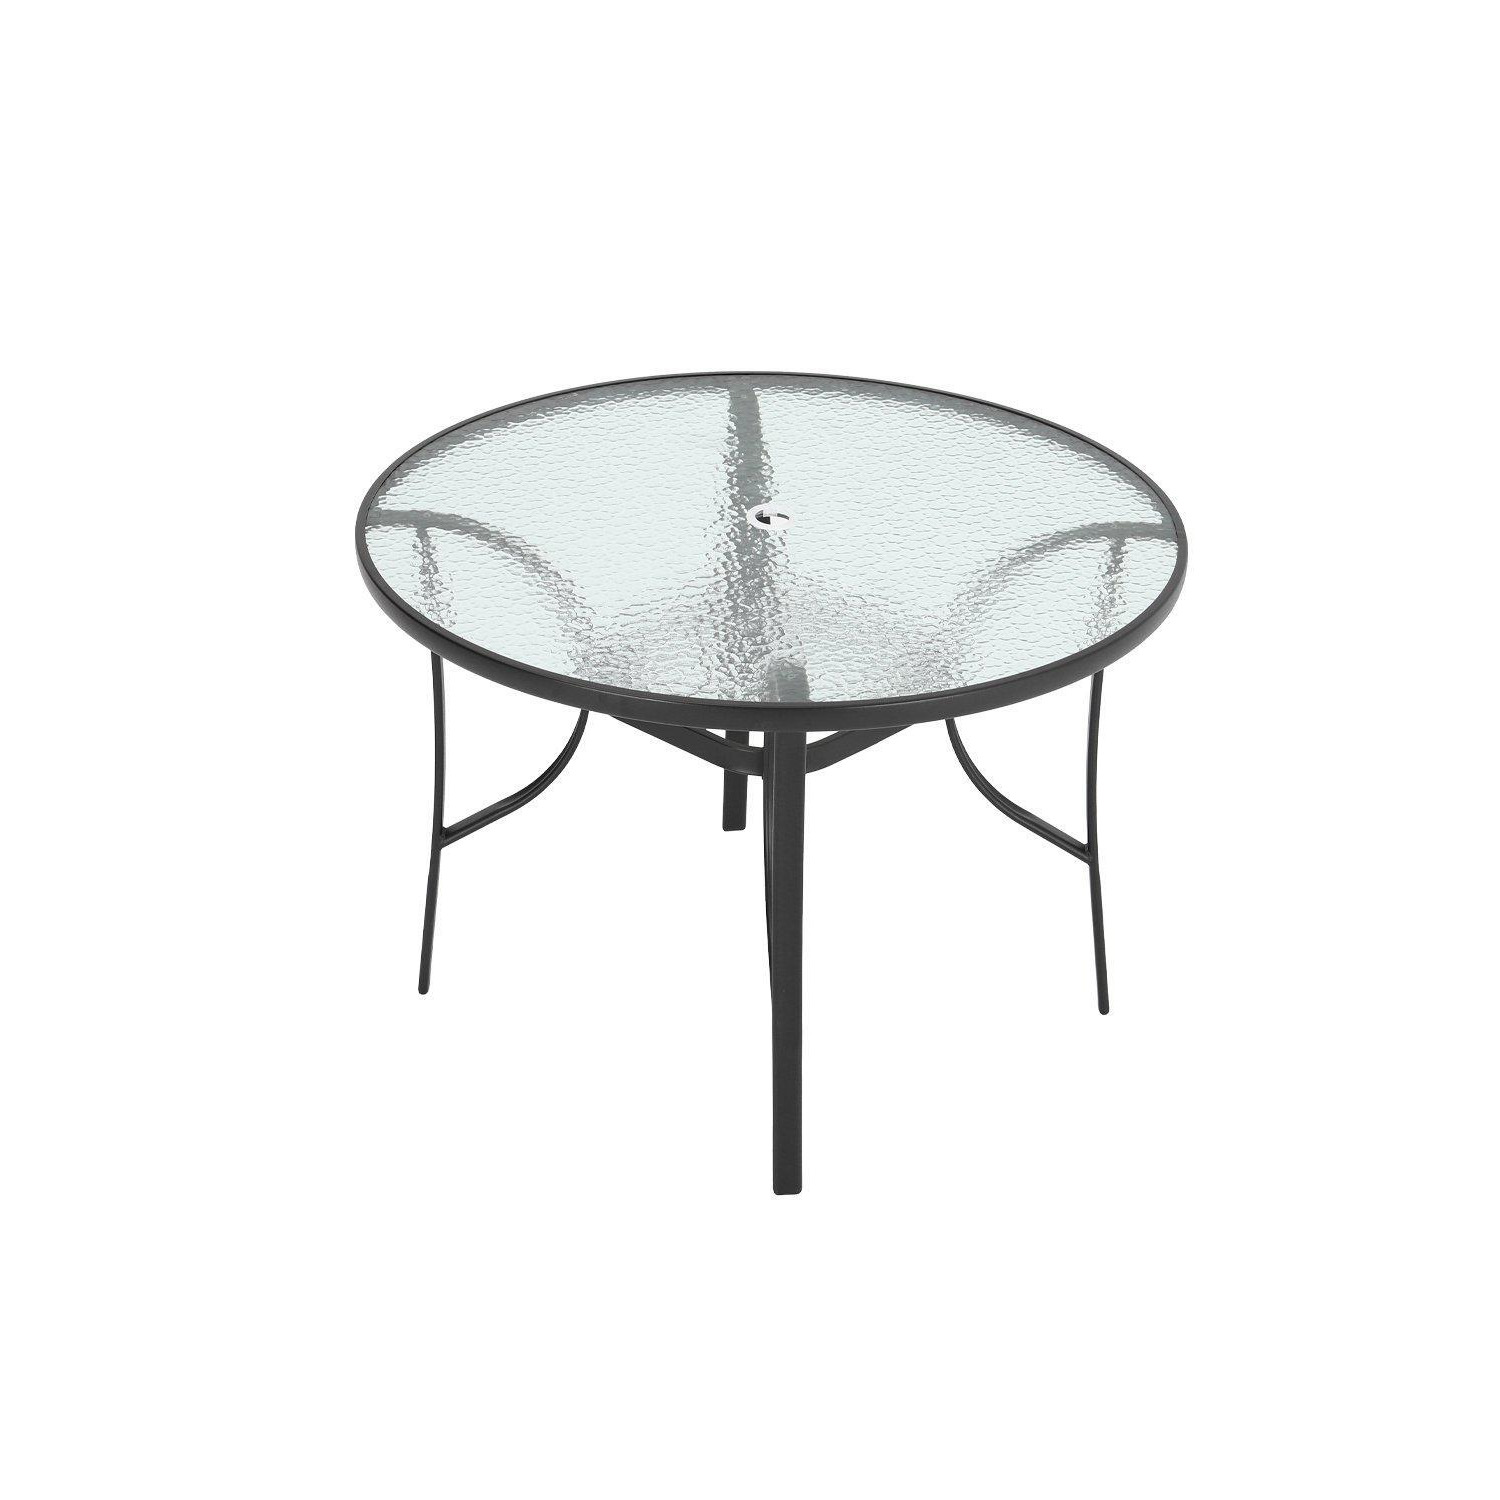 Tempered Glass Steel Round Garden Dining Table - image 1